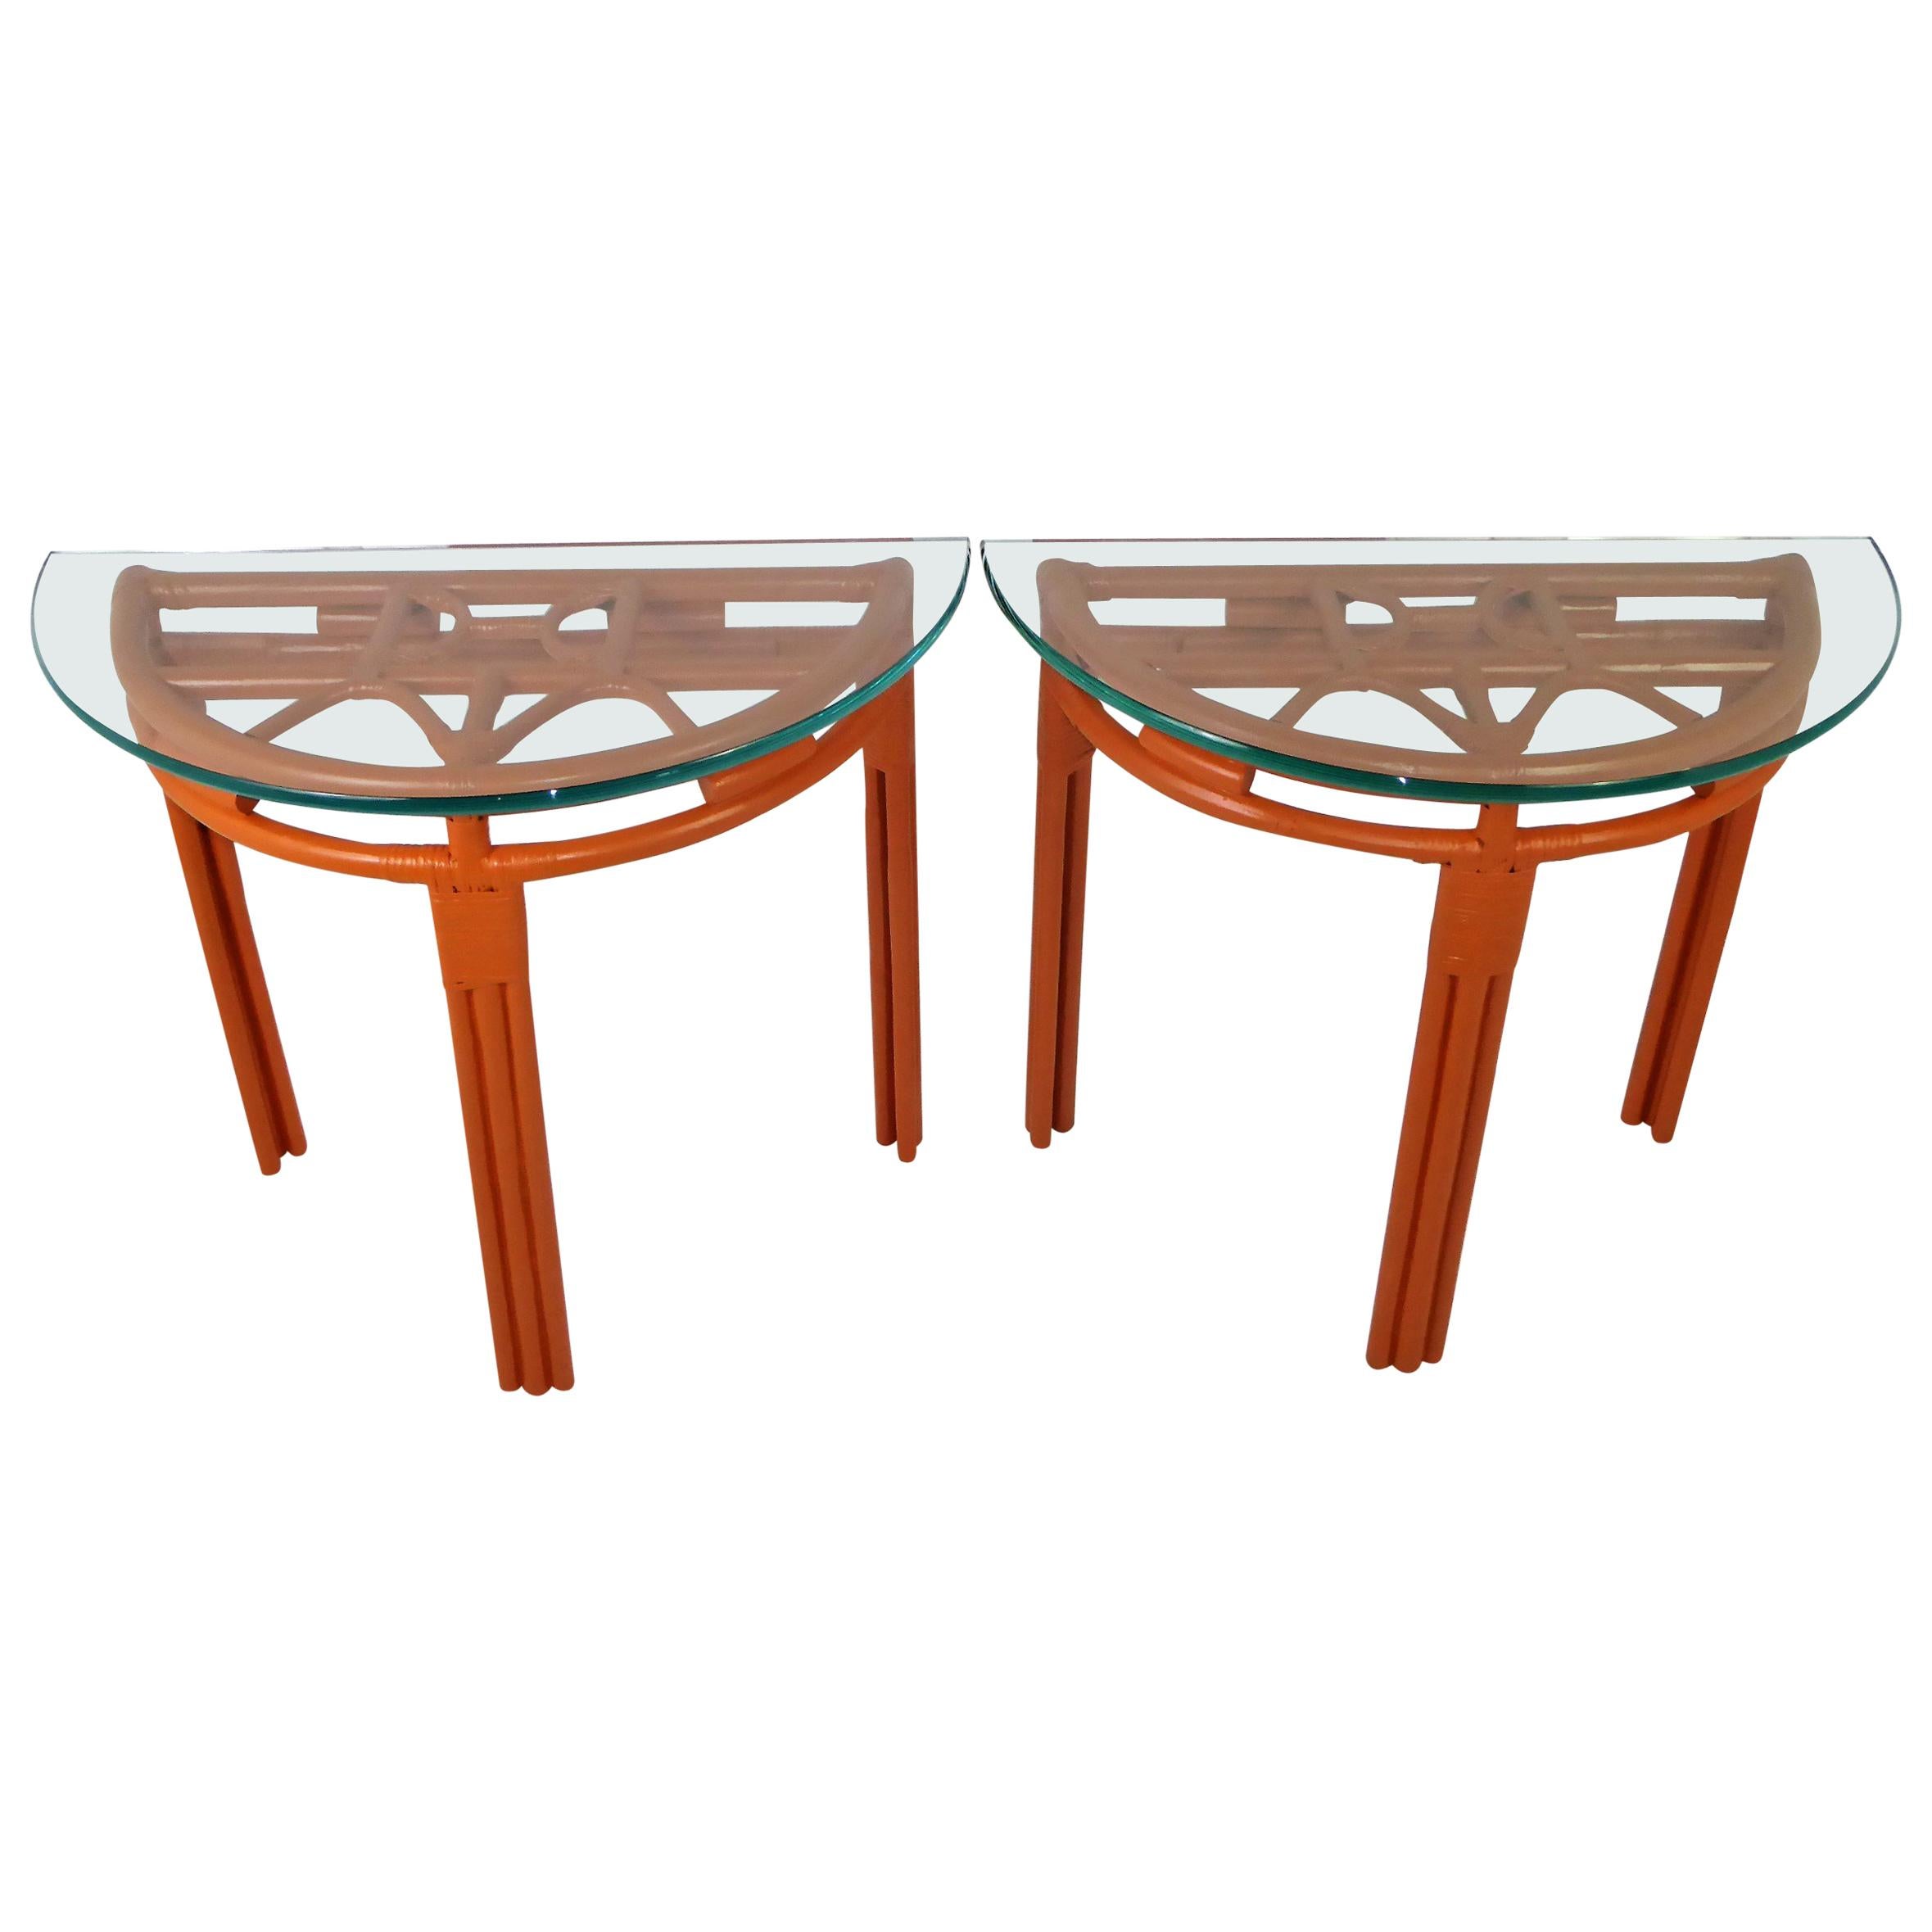 1940s Painted Rattan Demilune Glass Top Consoles in Hermes Orange